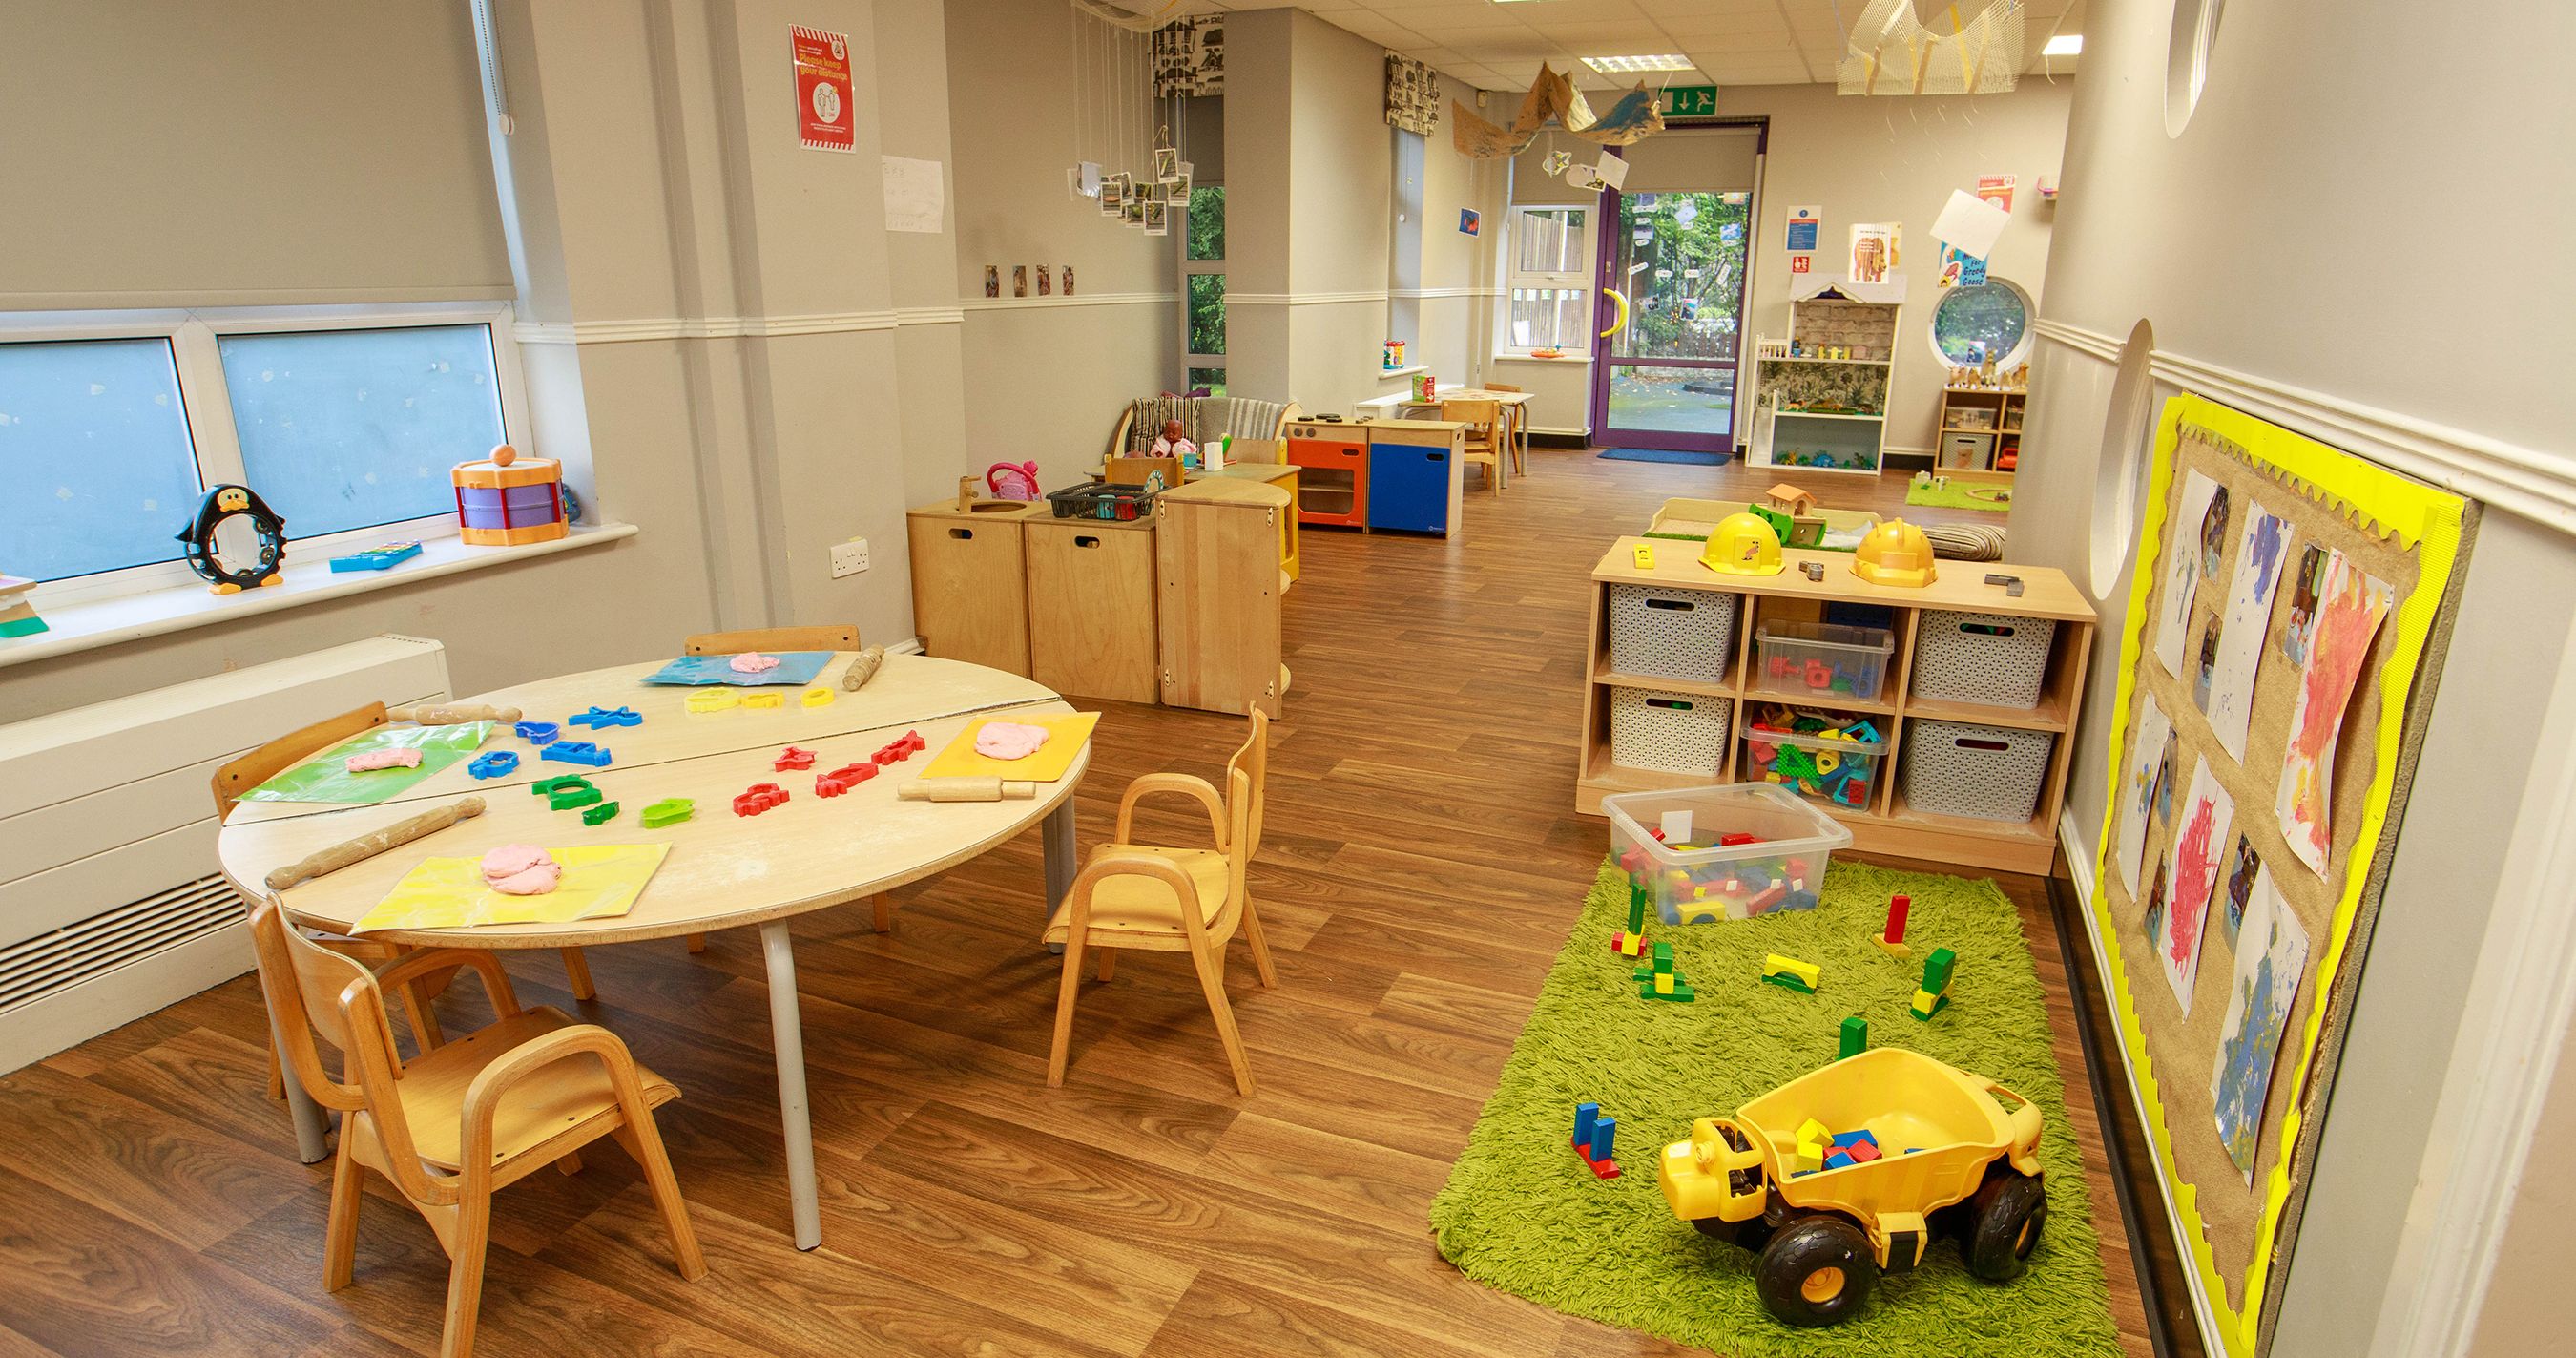 Busy Bees at Wigan, Scholes - The best start in life Busy Bees at Wigan, Scholes Wigan 01942 239939